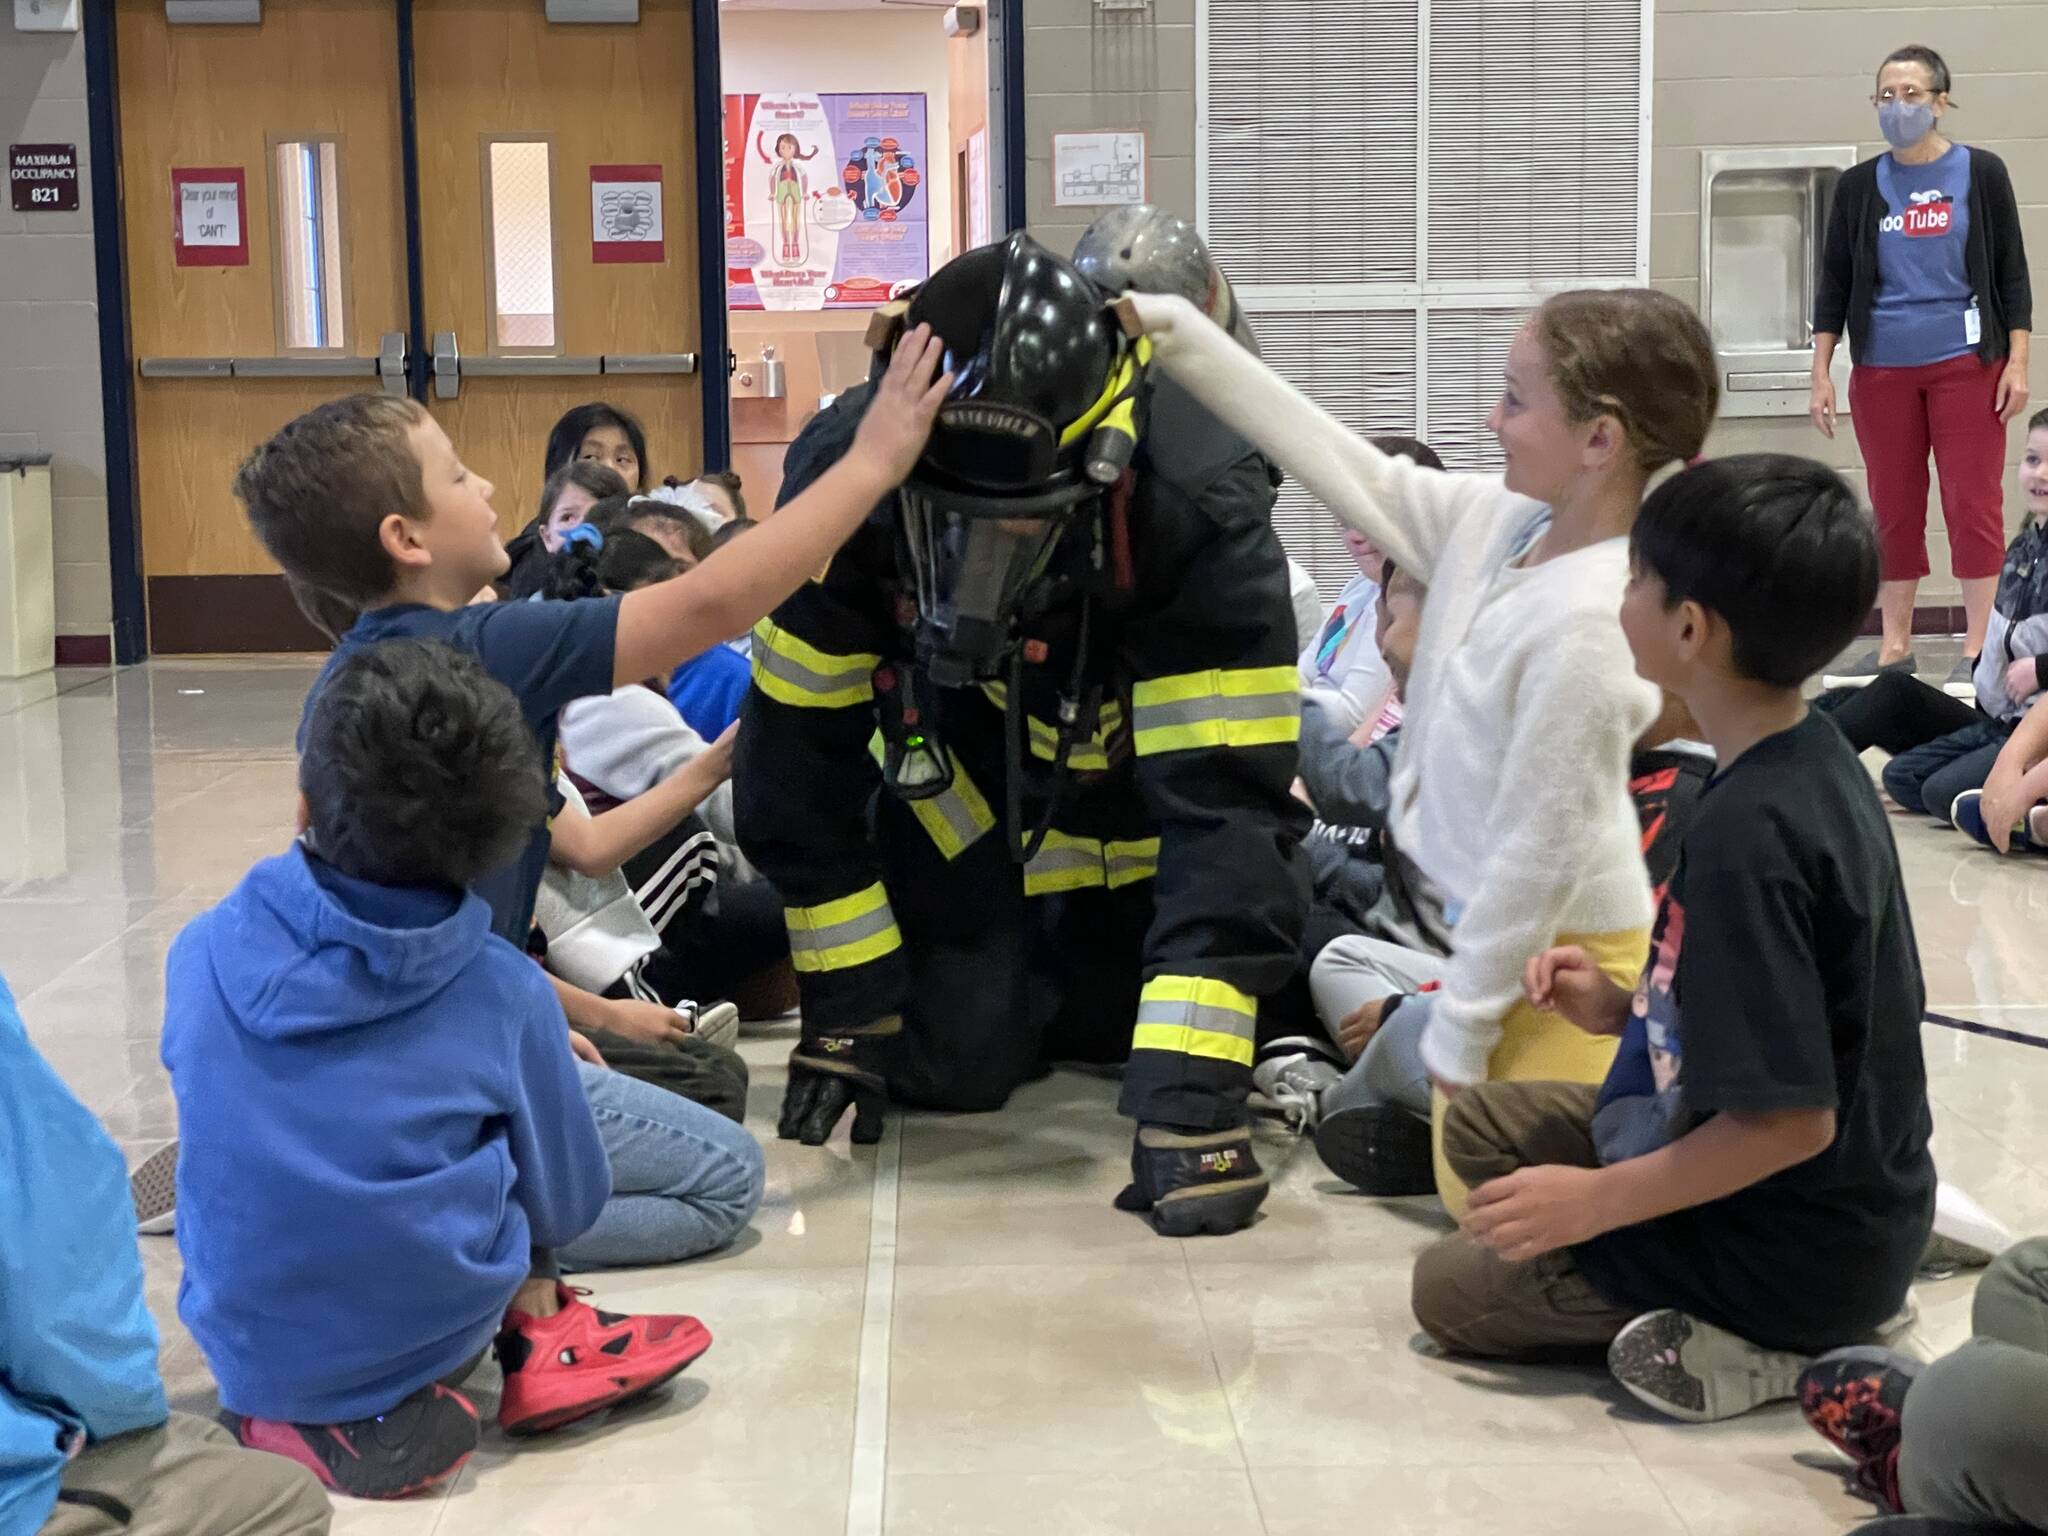 Firefighter/EMT James Freed crawls in full kit through a group of second graders at McDermoth Elementary School during a Fire Prevention Week presentation from the Aberdeen Fire Department on Monday.
Michael S. Lockett | The Daily World